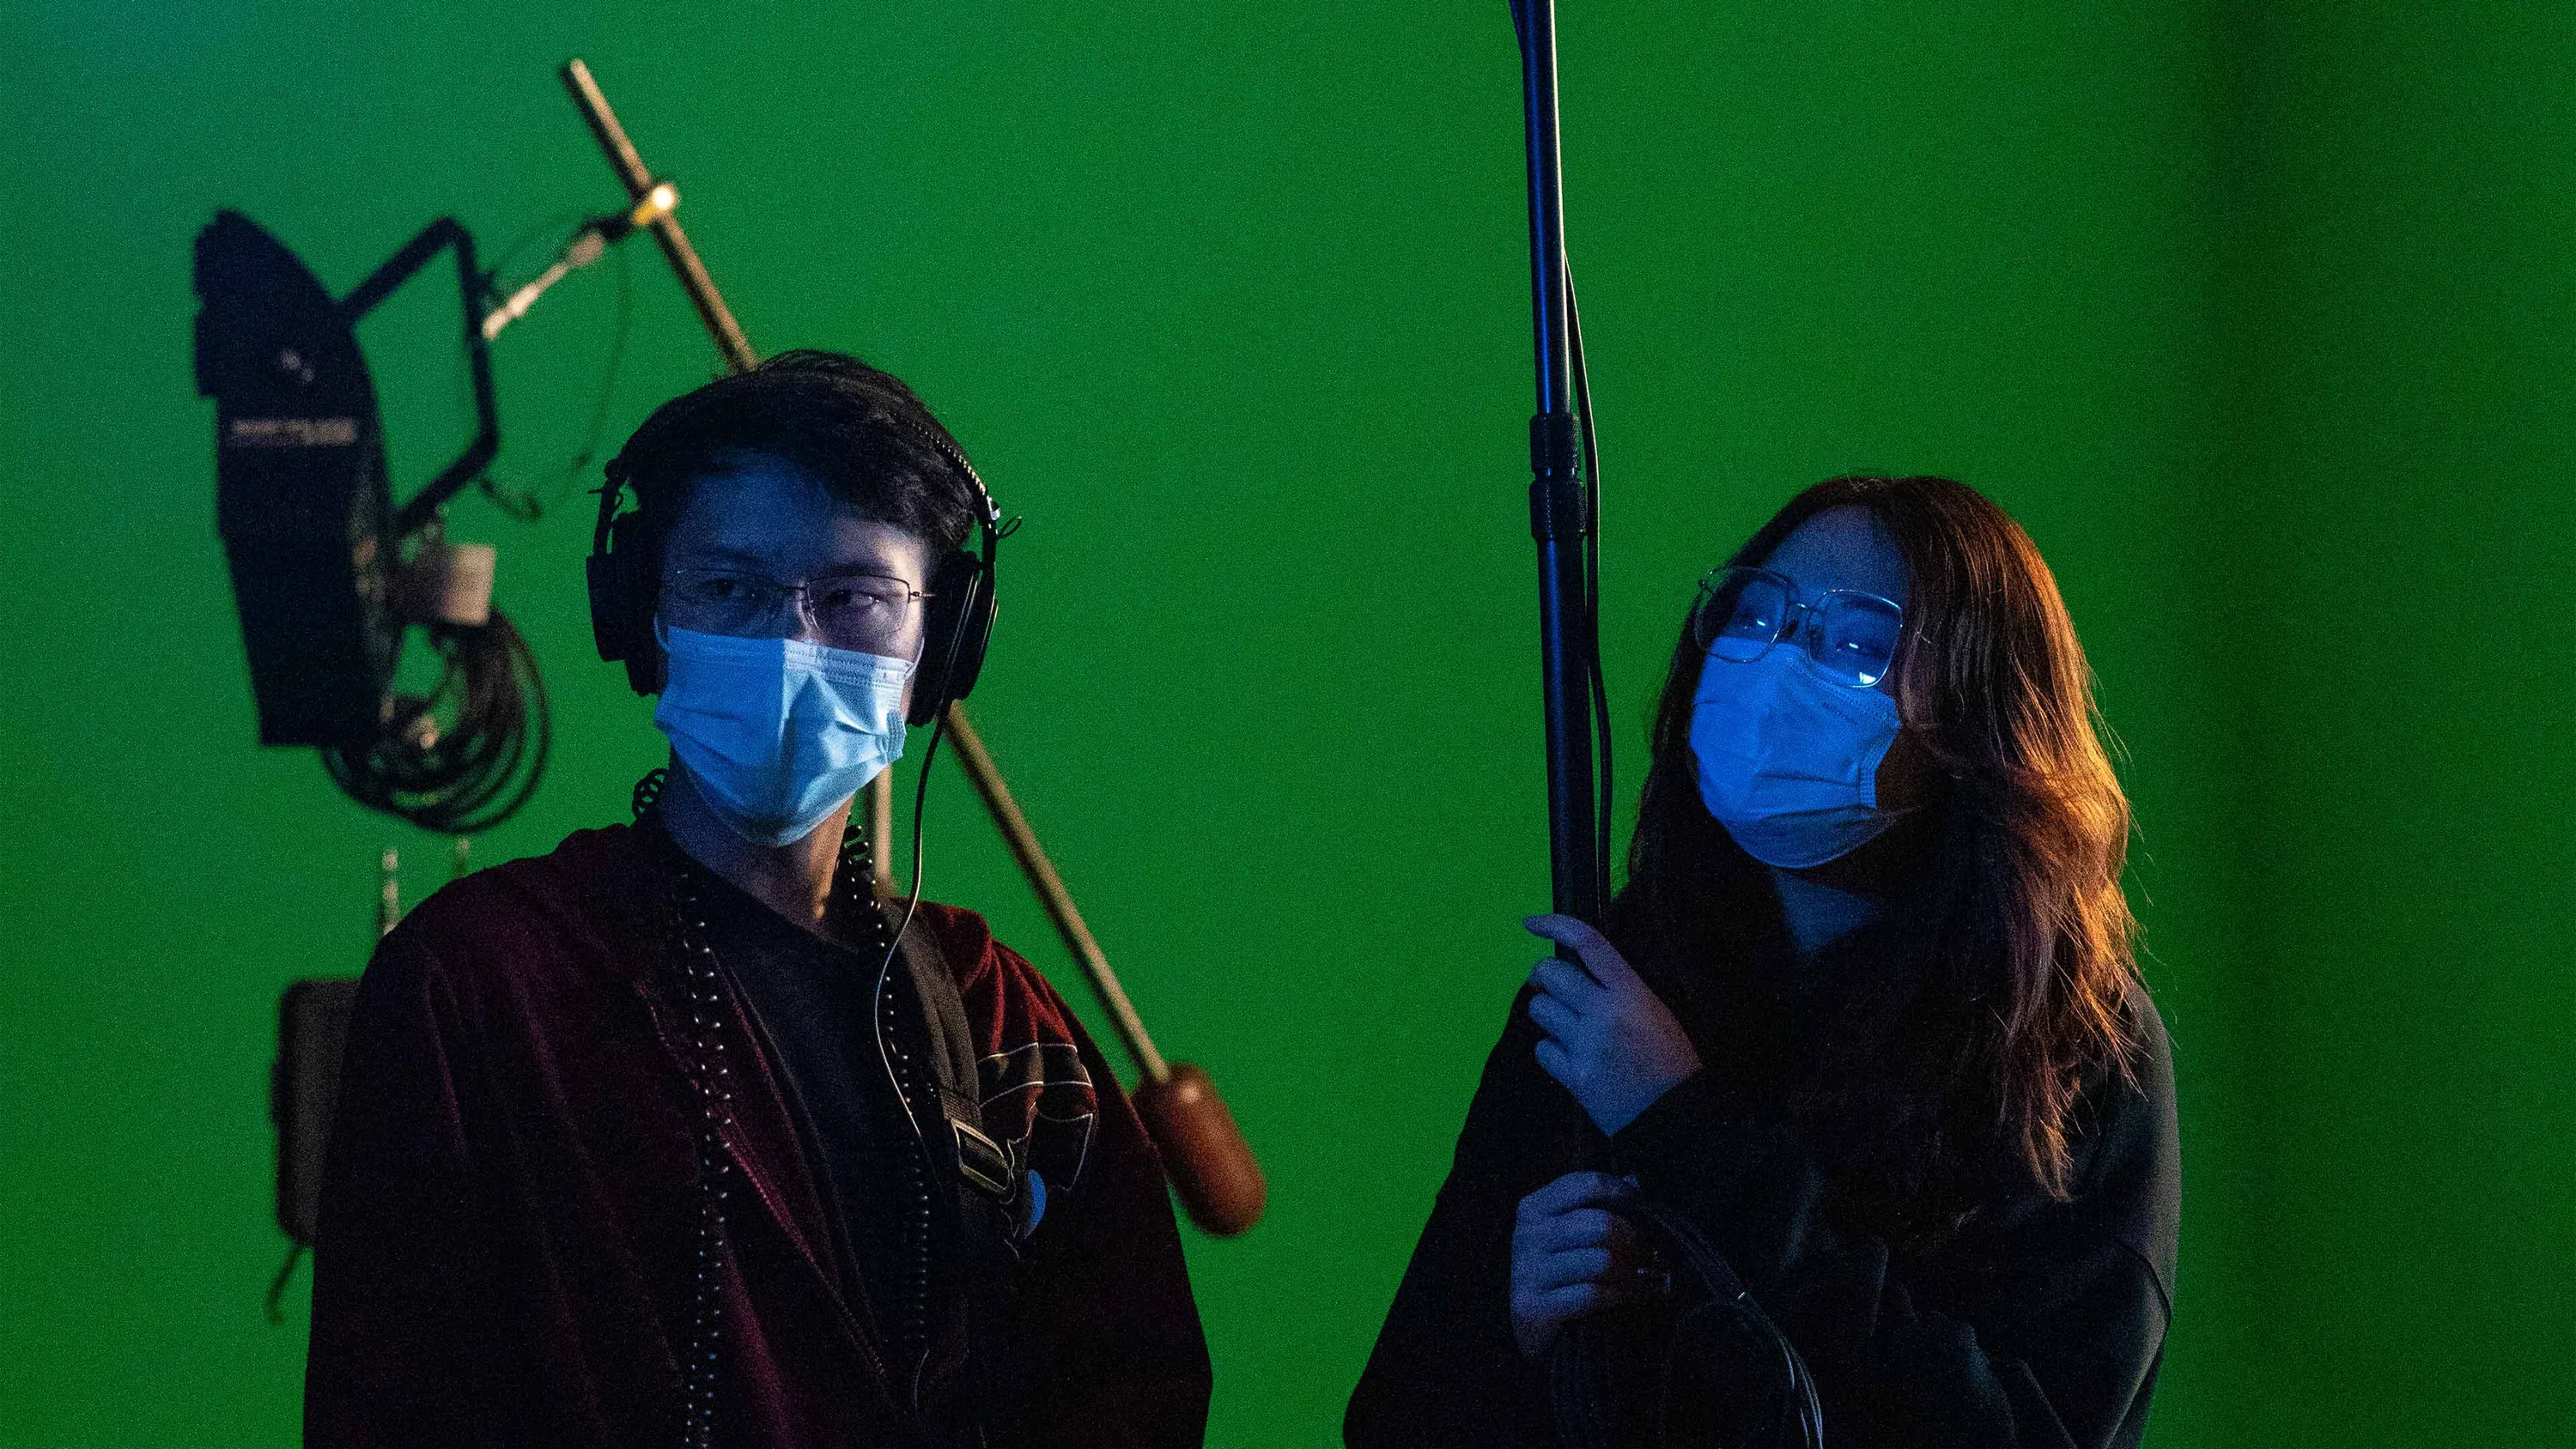 Two students holding boom mics on the production stage.